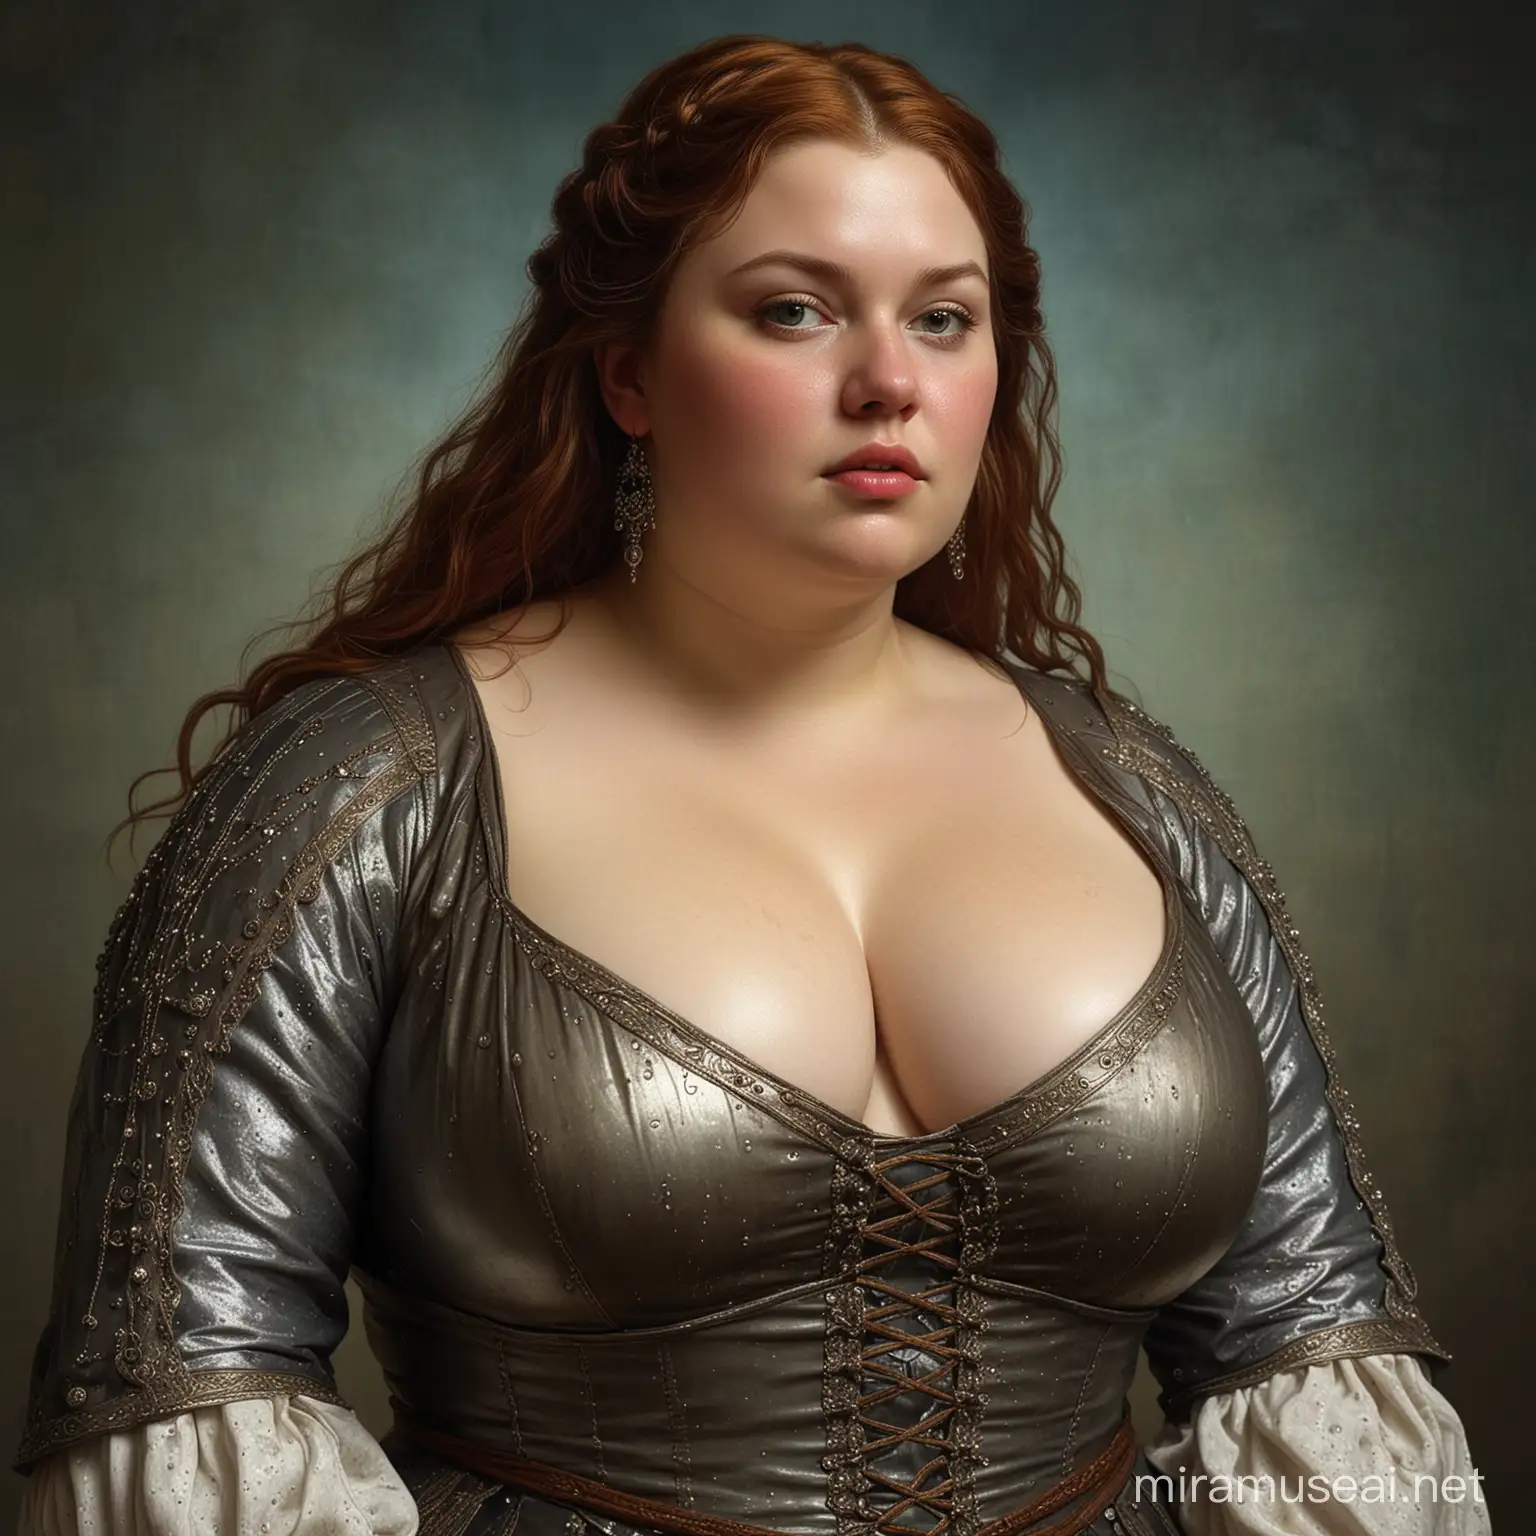 Thomas dodd depicting Ultrarealistic wet chubby woman  in tight medieval dress,  high details, color. 